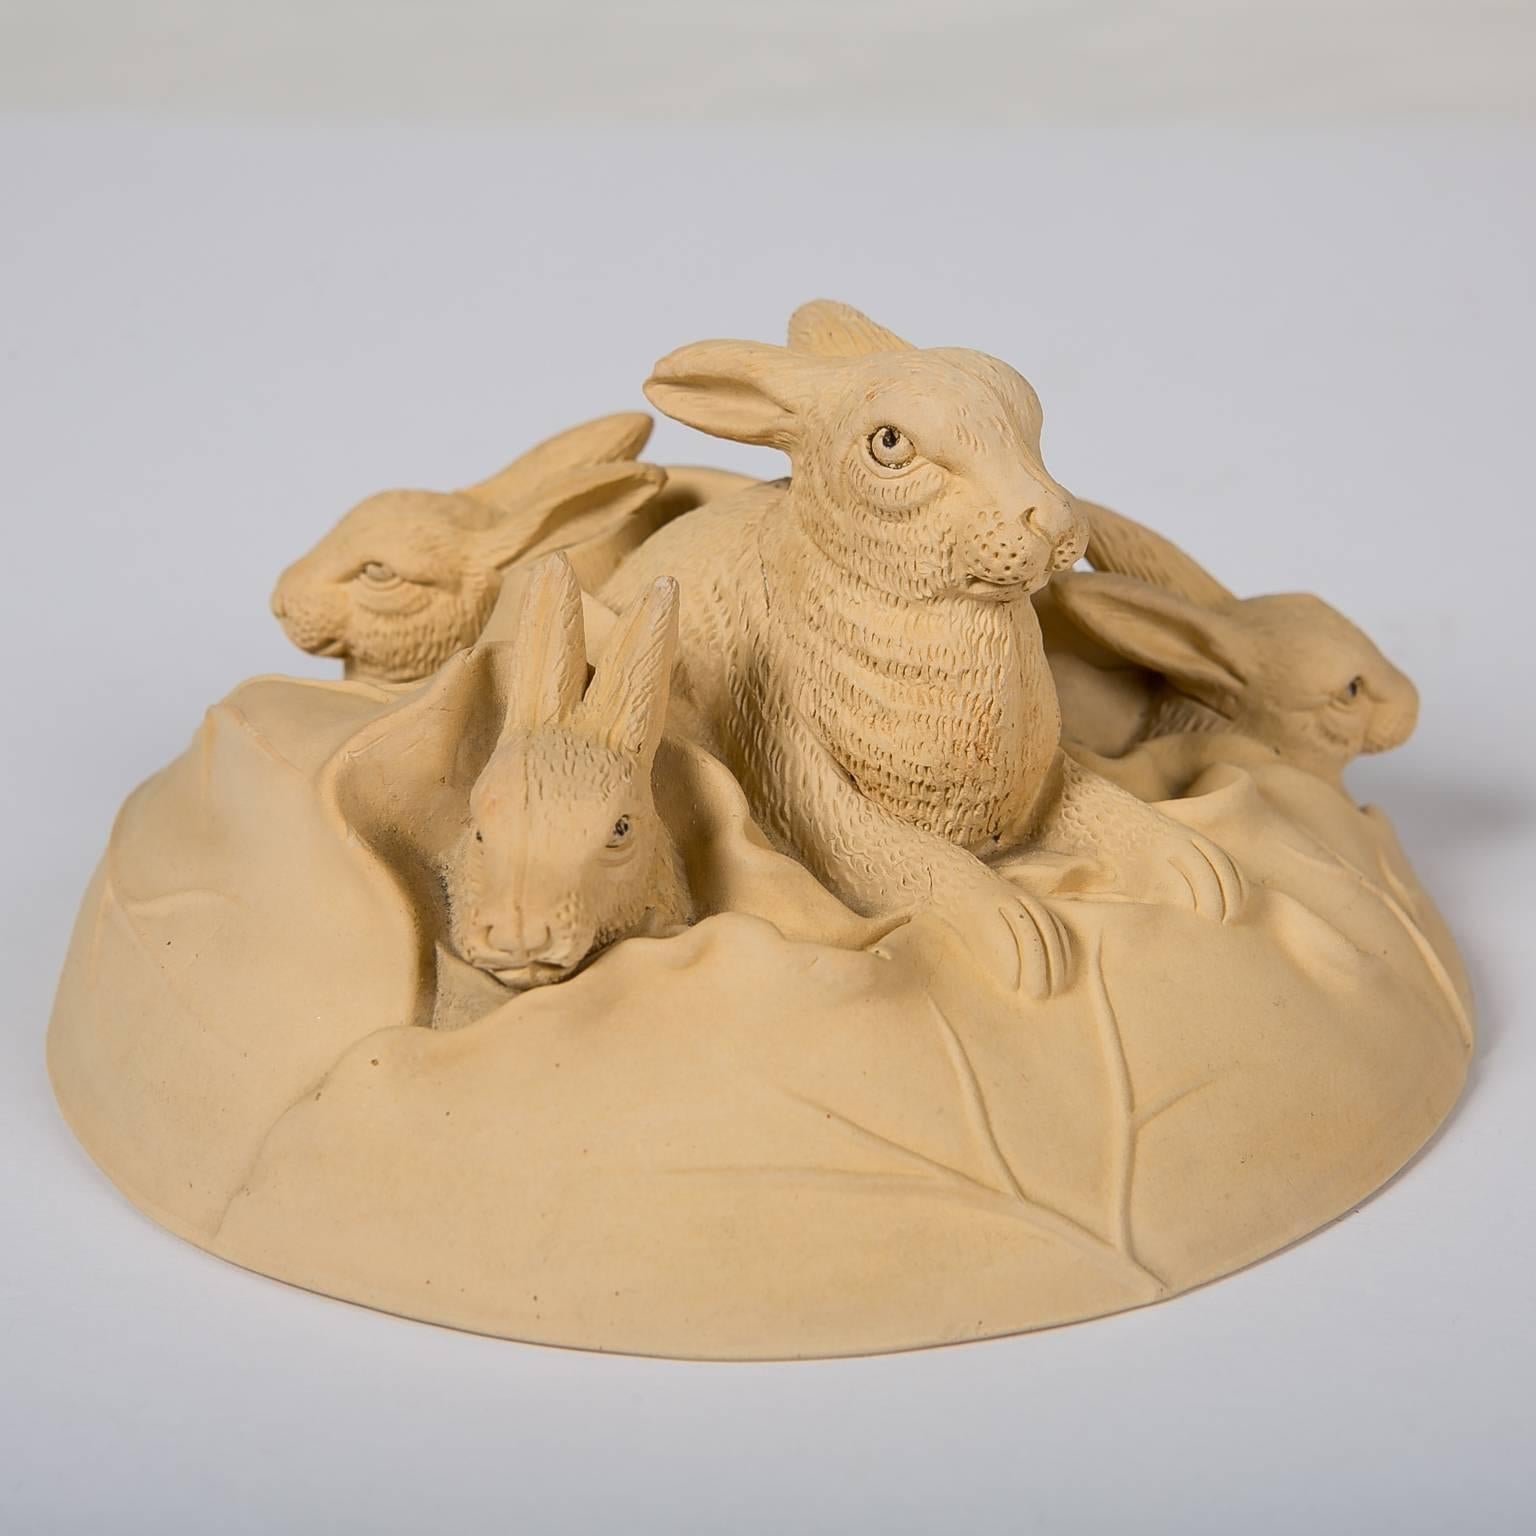 Czech  Game Pie Dish Decorated with Four Rabbits by William Schiller & Sons circa 1880